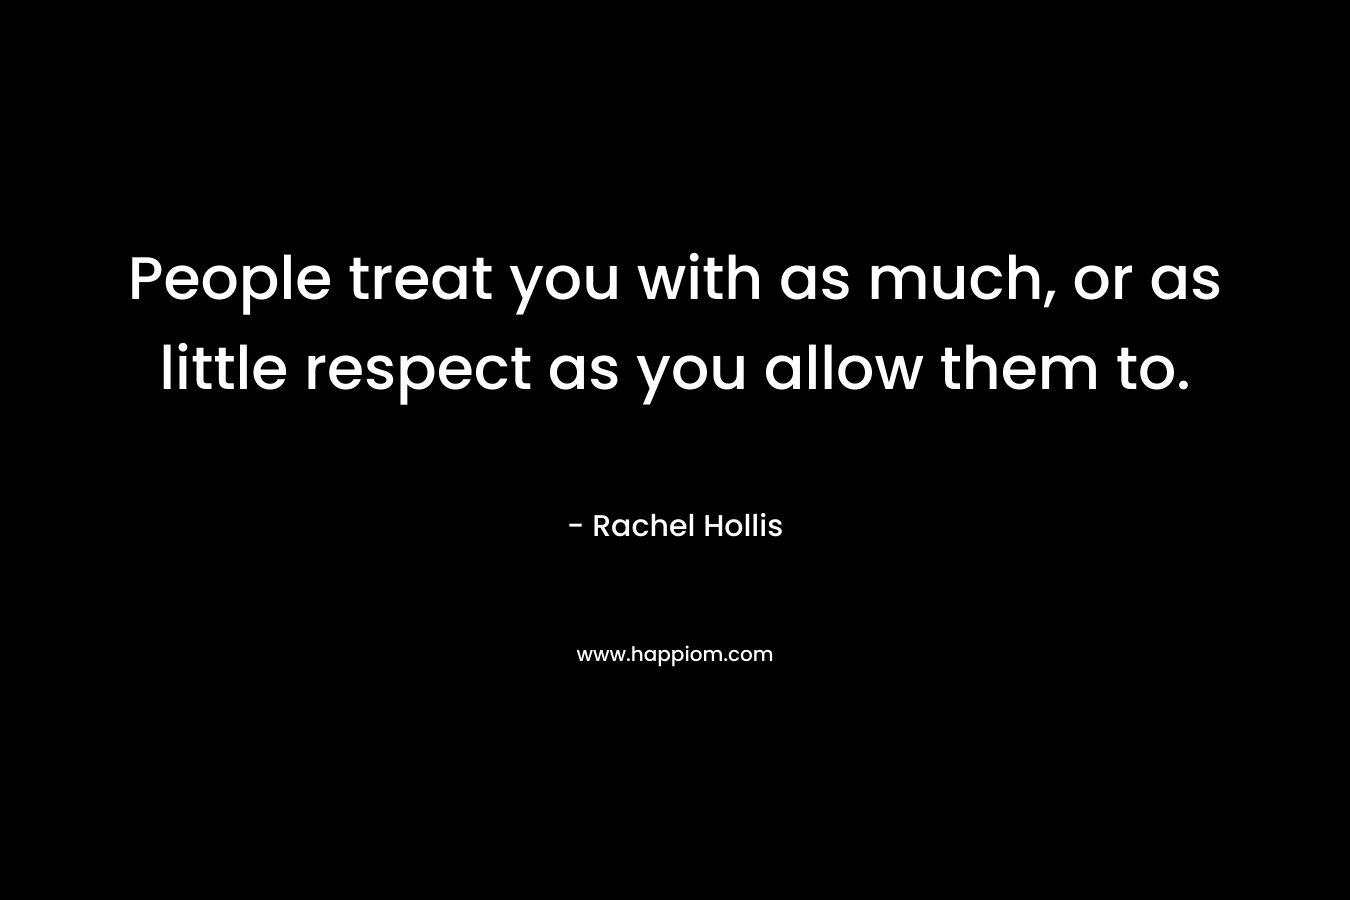 People treat you with as much, or as little respect as you allow them to.